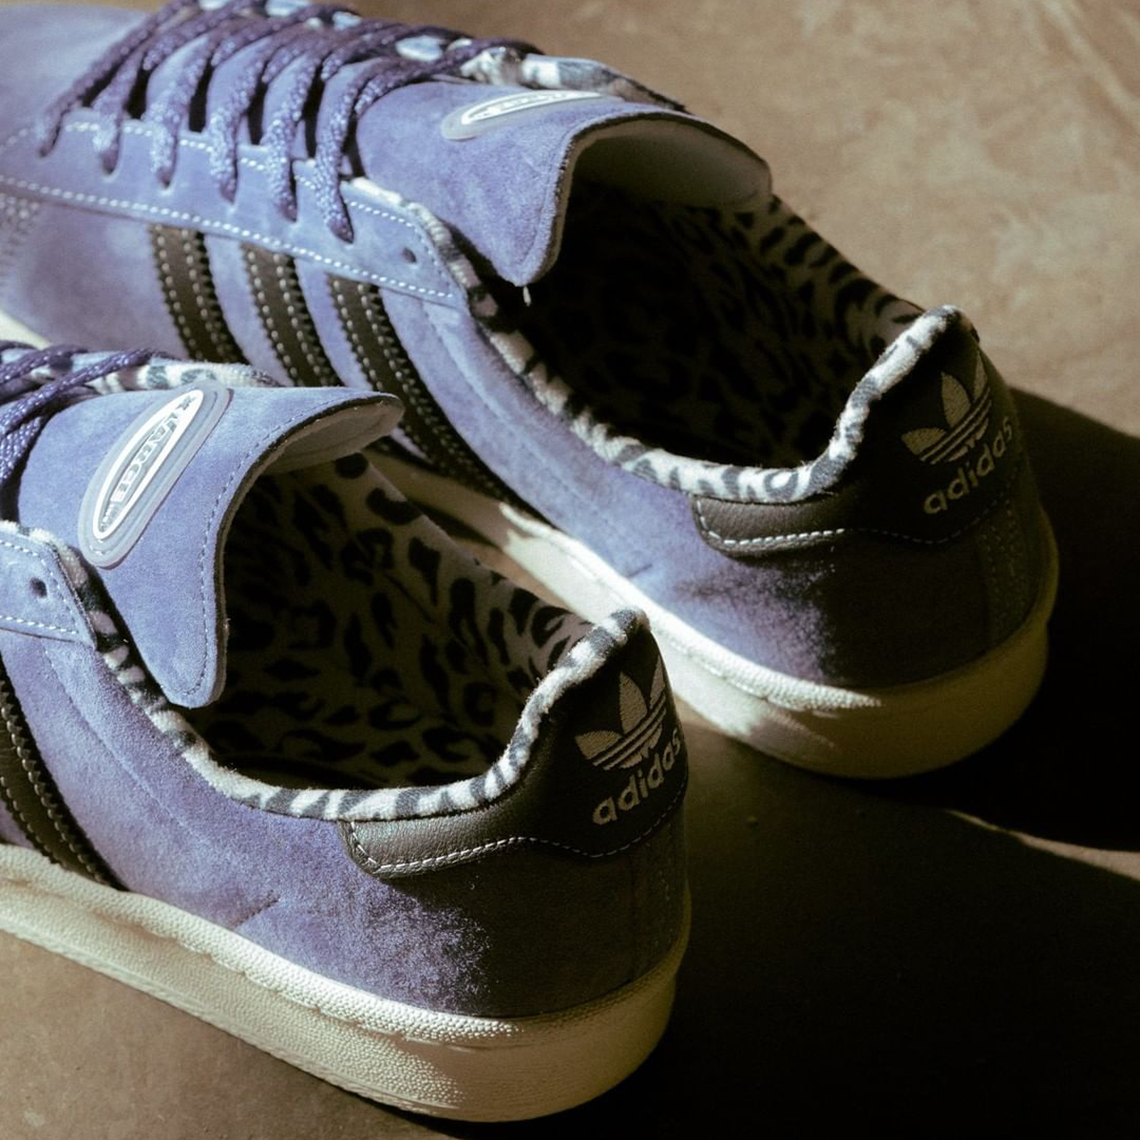 Xlarge Adidas Campus Release Date 2